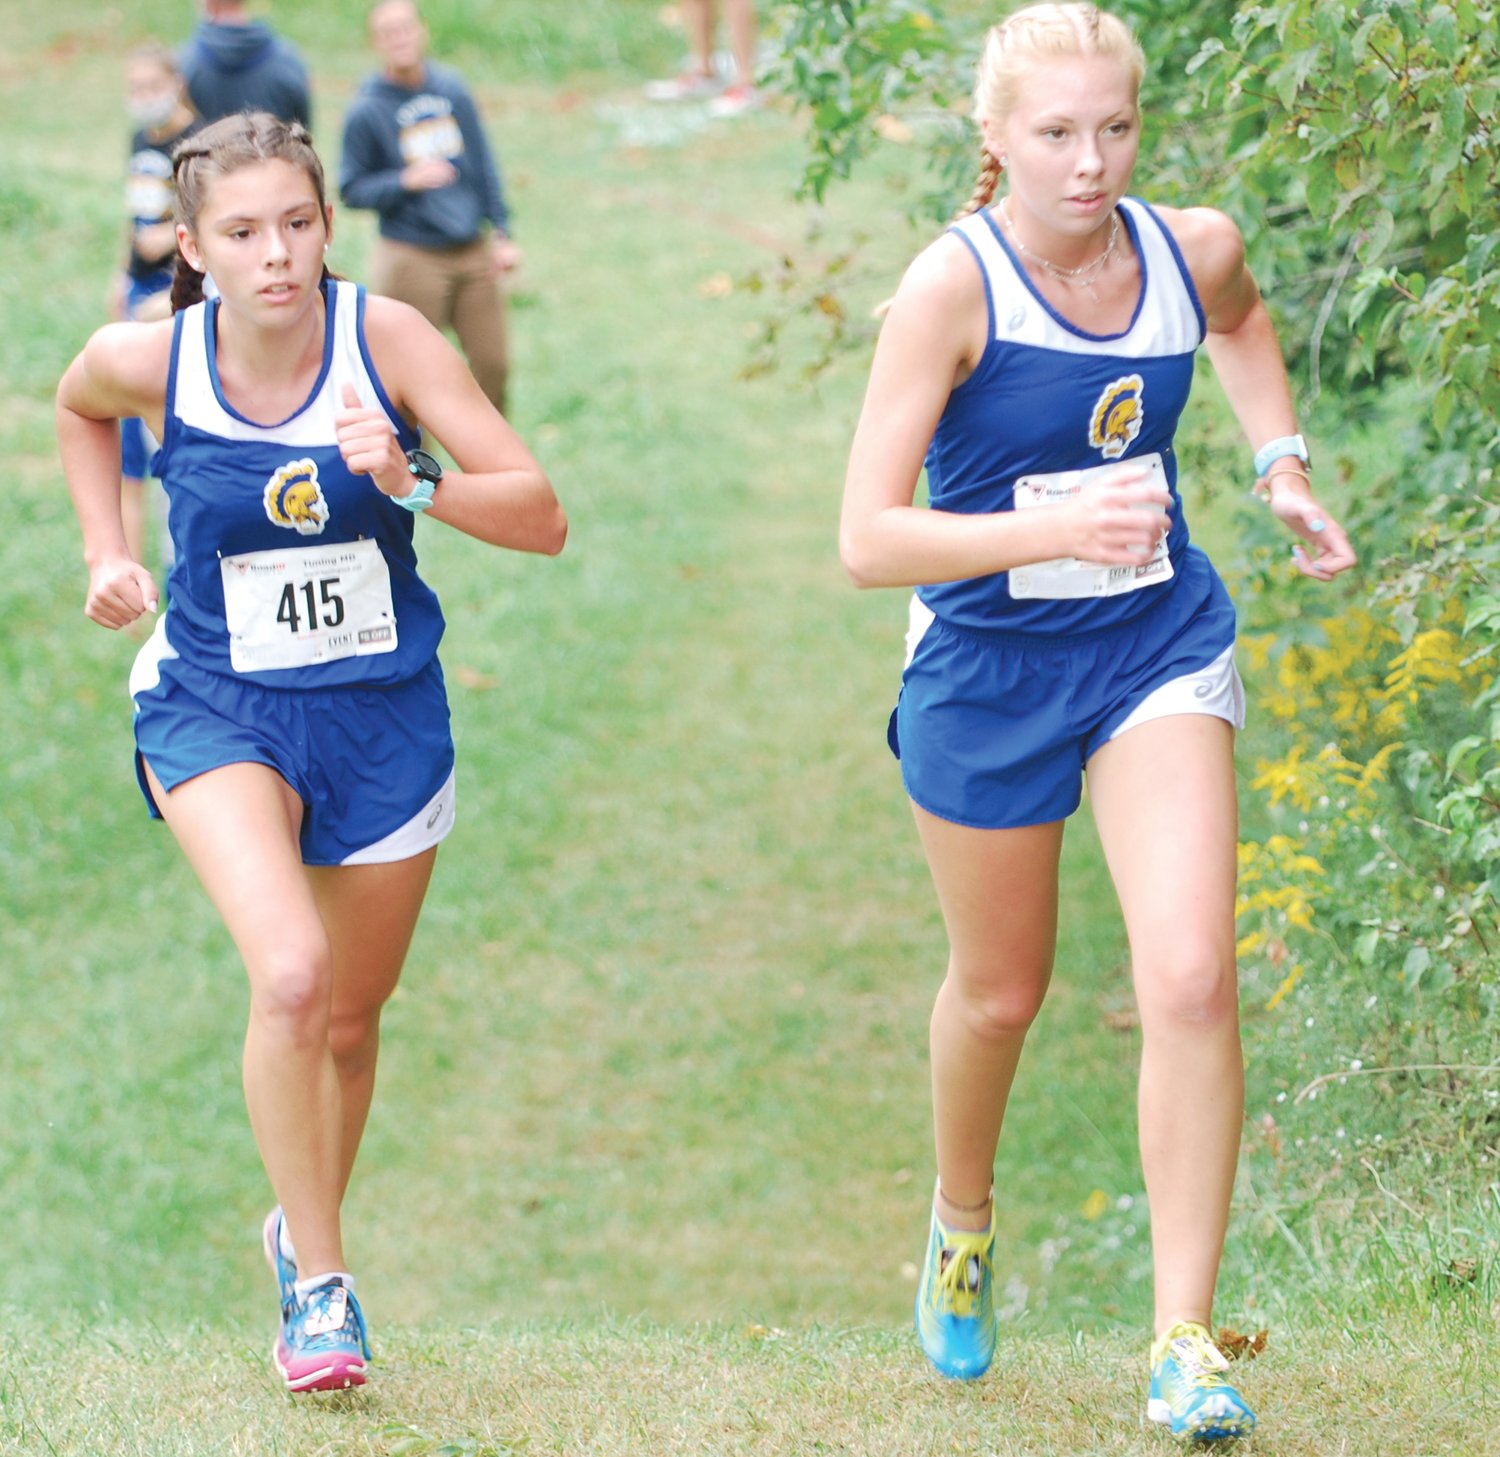 Crawfordsville's Shelby Greene and Halle Smith finished third and fourth respectively at the Montgomery County meet on Thursday.